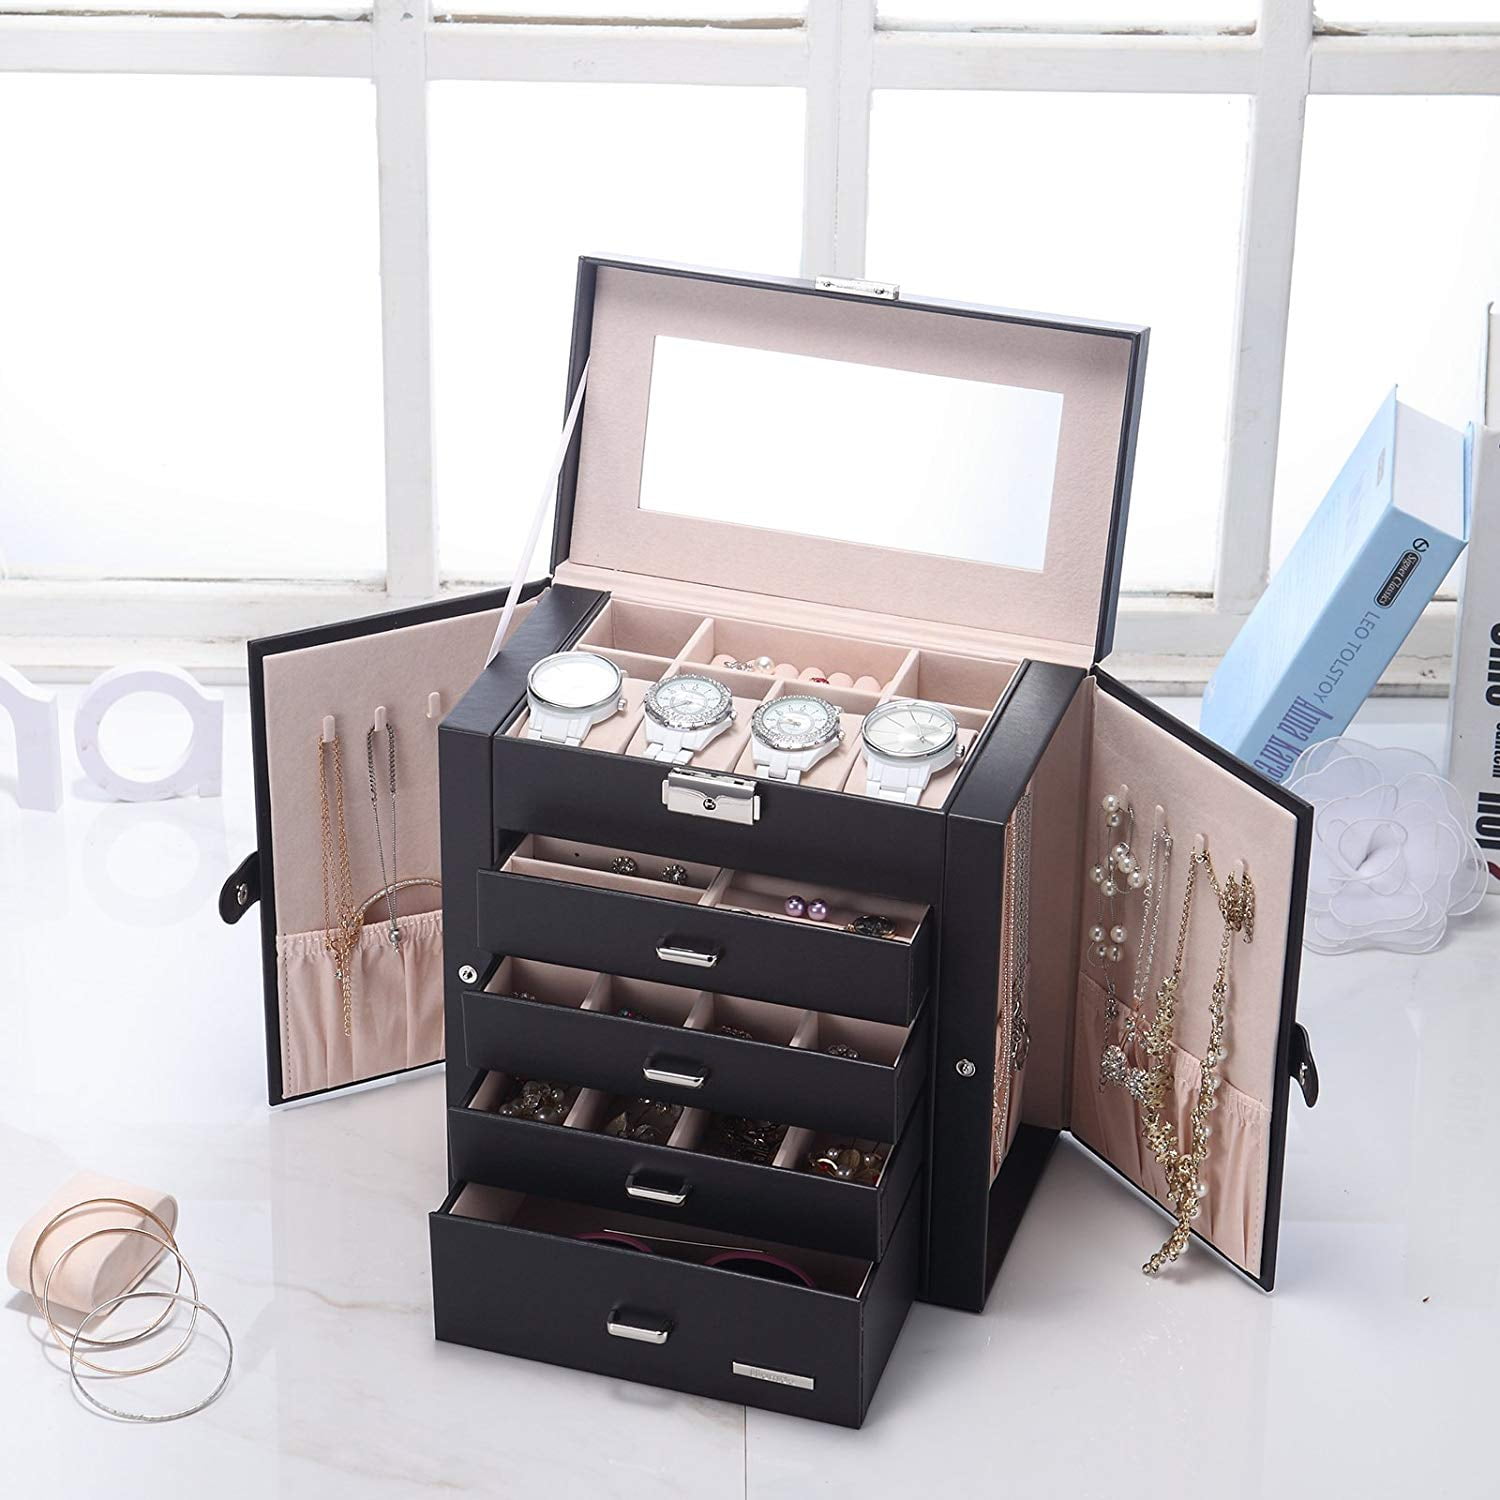 Details about   Necklace Ring Storage Organizer Double Layer Travel Jewel Gift Case LP 